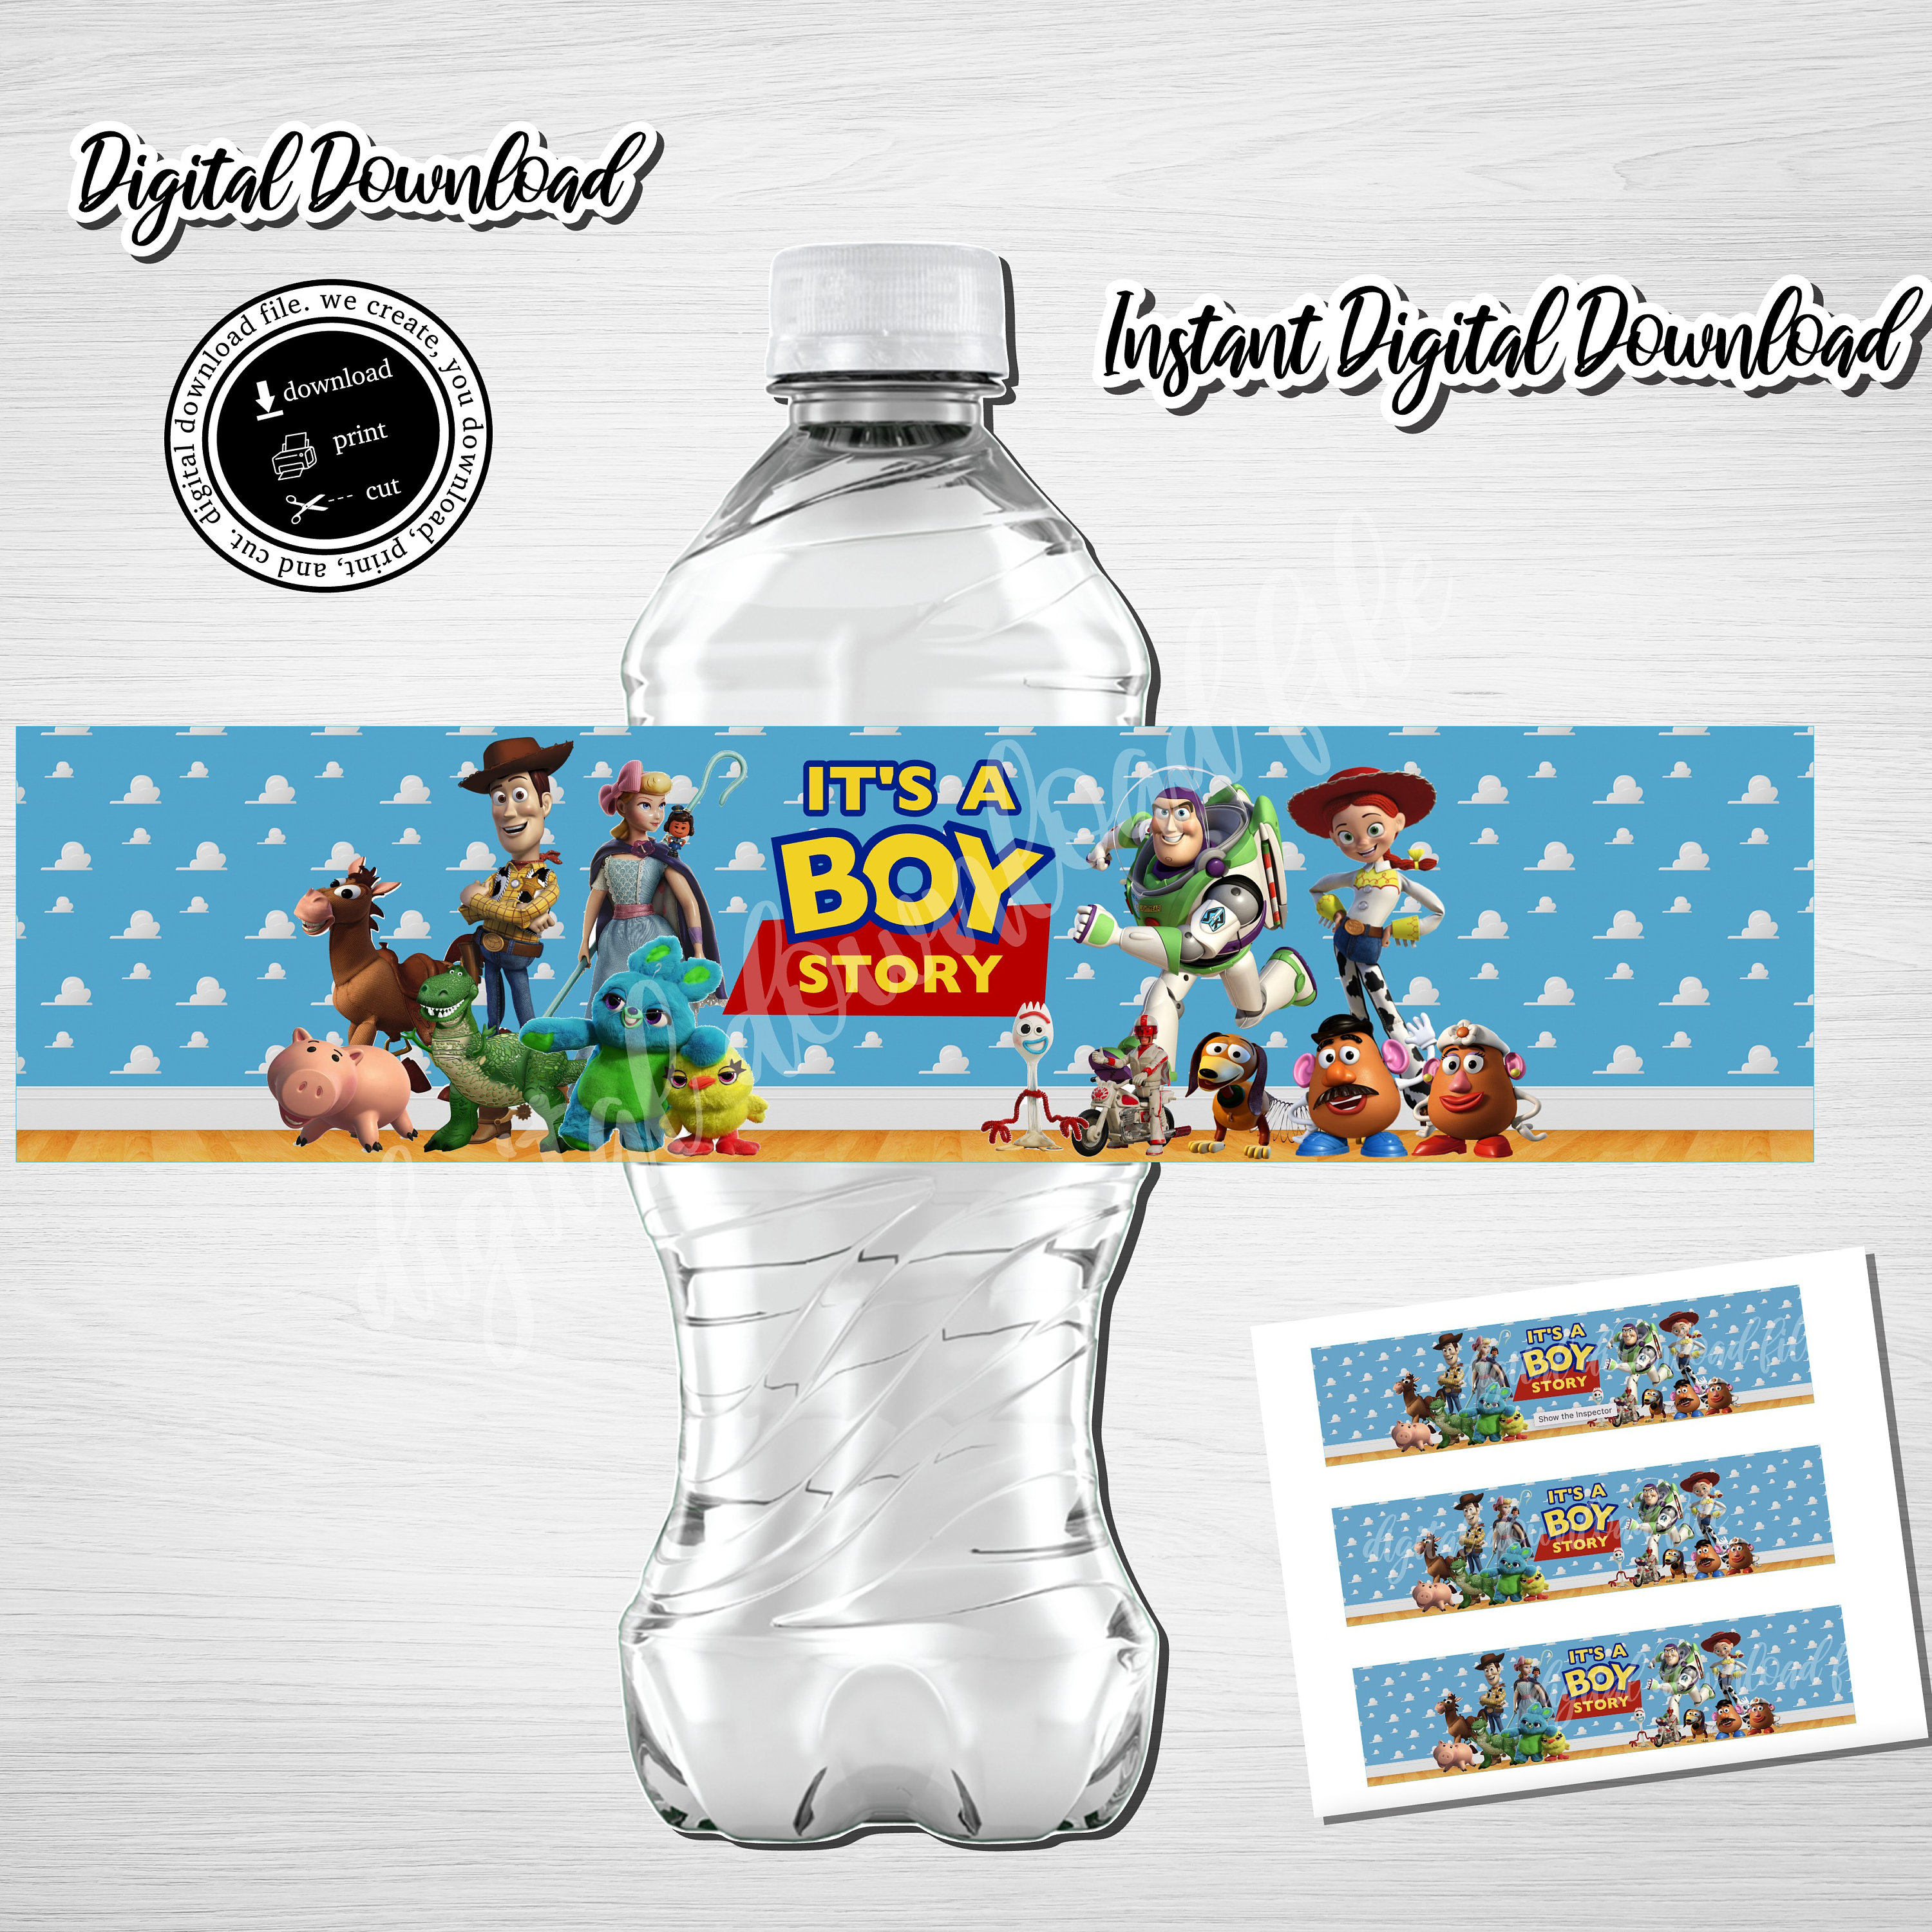 Forky Kit Editable Printable School Labels in Powerpoint Toy Story